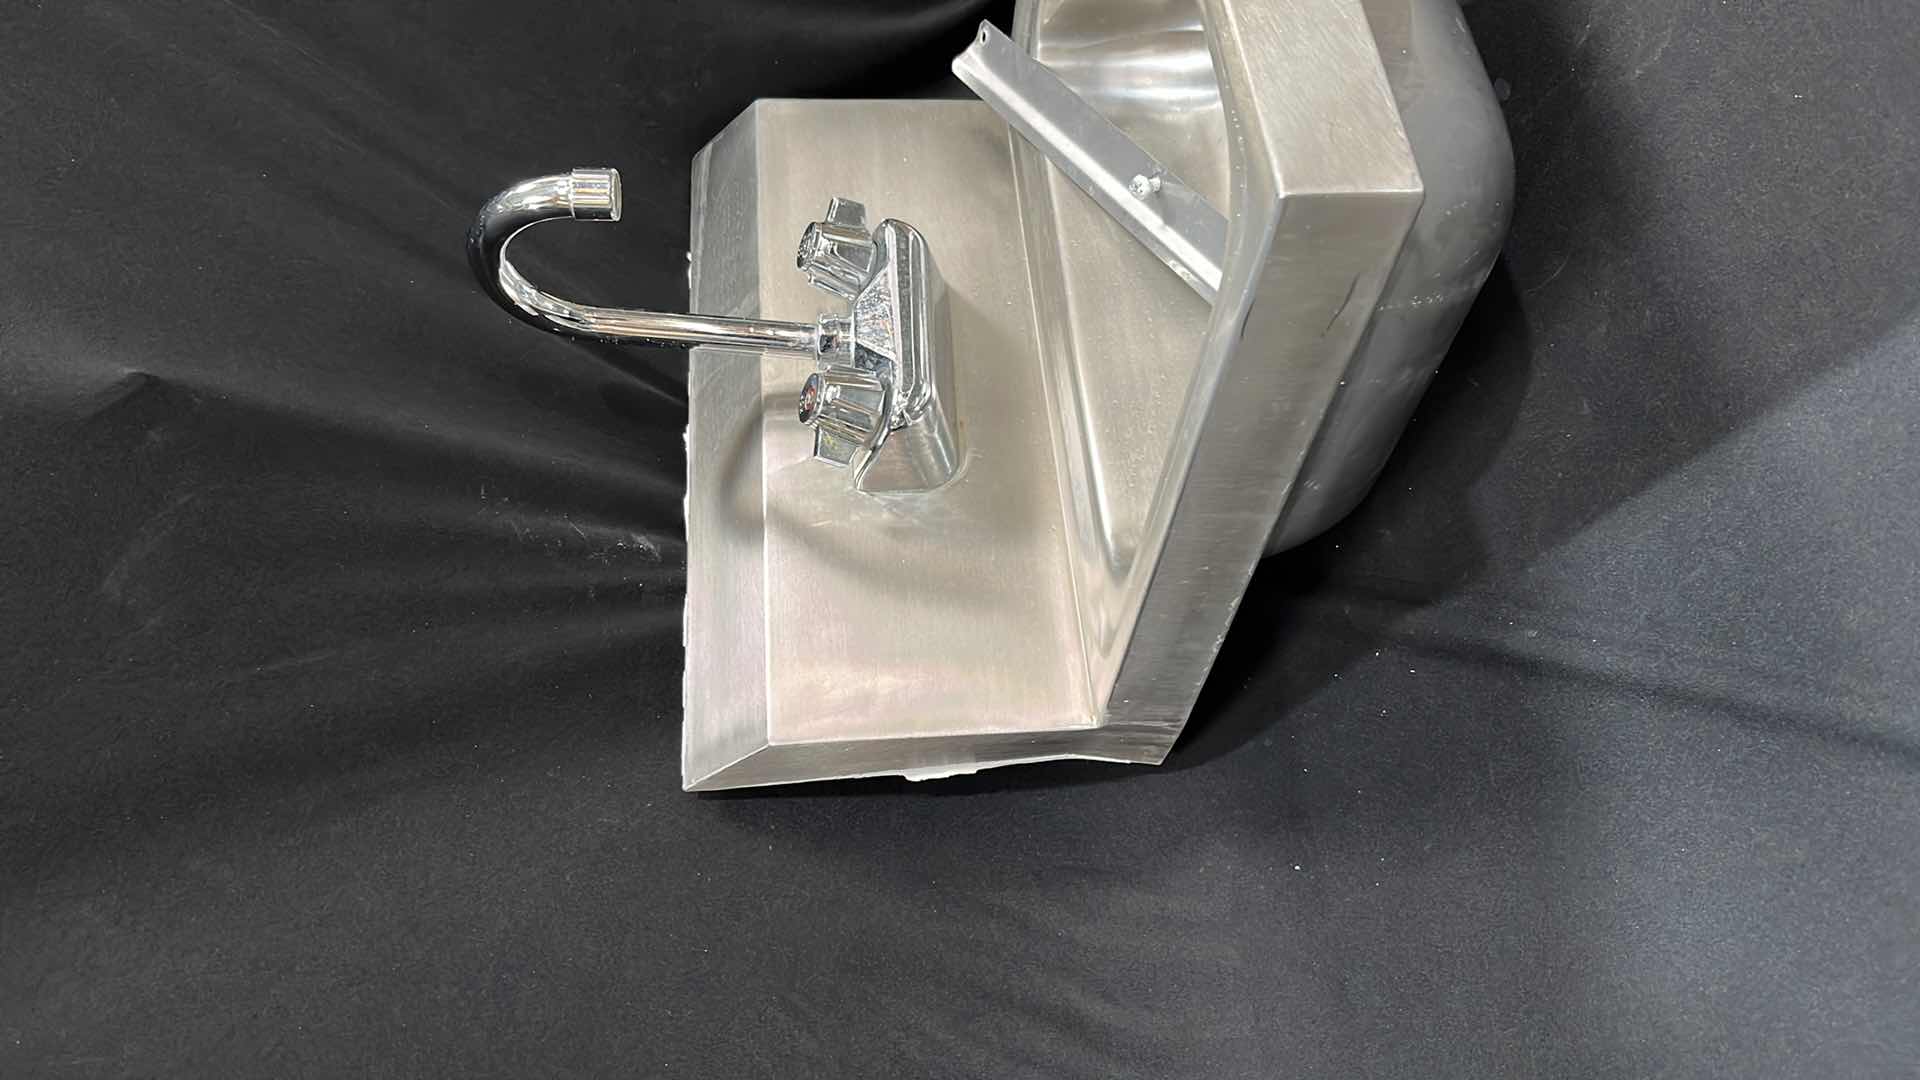 Photo 4 of STAINLESS STEEL HAND SINK 15” X 17.25” X 15”H